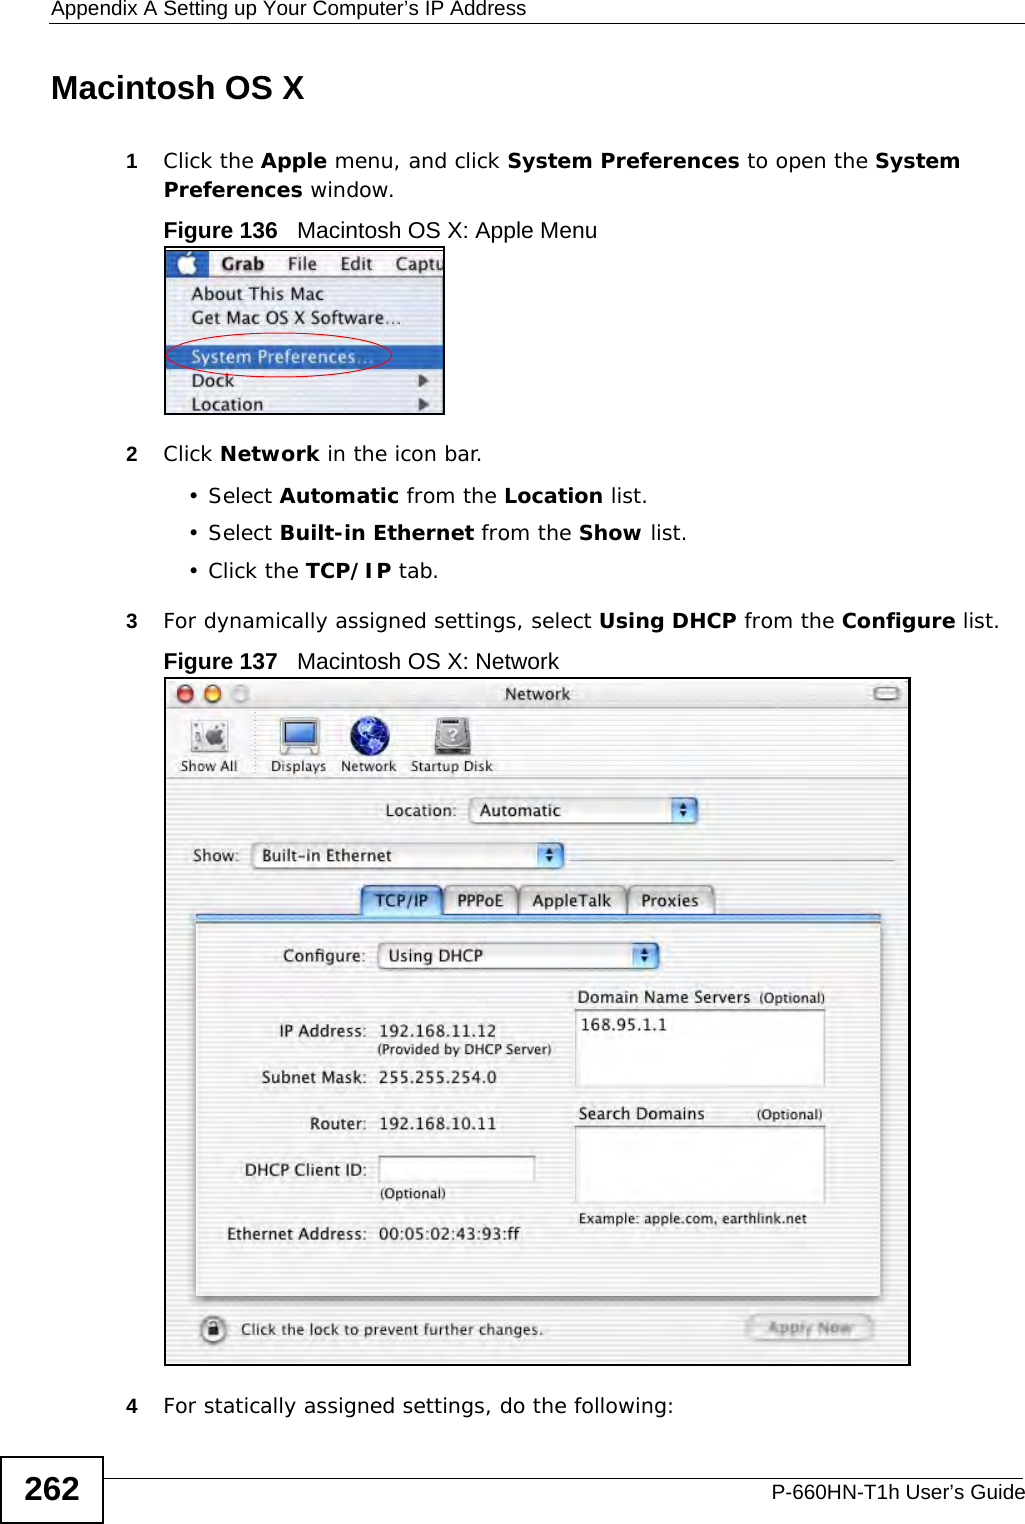 Appendix A Setting up Your Computer’s IP AddressP-660HN-T1h User’s Guide262Macintosh OS X1Click the Apple menu, and click System Preferences to open the System Preferences window.Figure 136   Macintosh OS X: Apple Menu2Click Network in the icon bar.   • Select Automatic from the Location list.• Select Built-in Ethernet from the Show list. •Click the TCP/IP tab.3For dynamically assigned settings, select Using DHCP from the Configure list.Figure 137   Macintosh OS X: Network4For statically assigned settings, do the following: